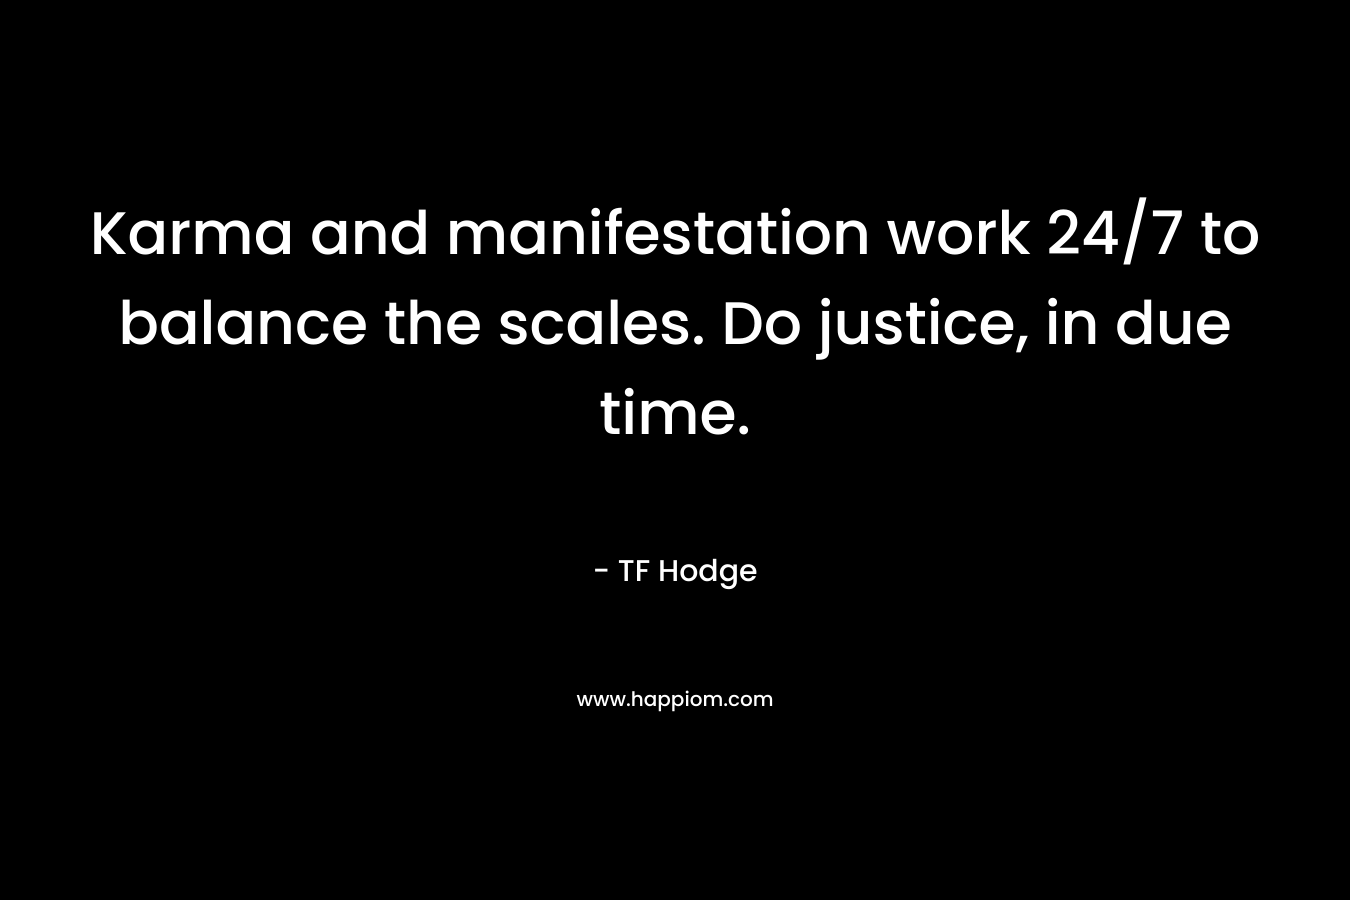 Karma and manifestation work 24/7 to balance the scales. Do justice, in due time. – TF Hodge